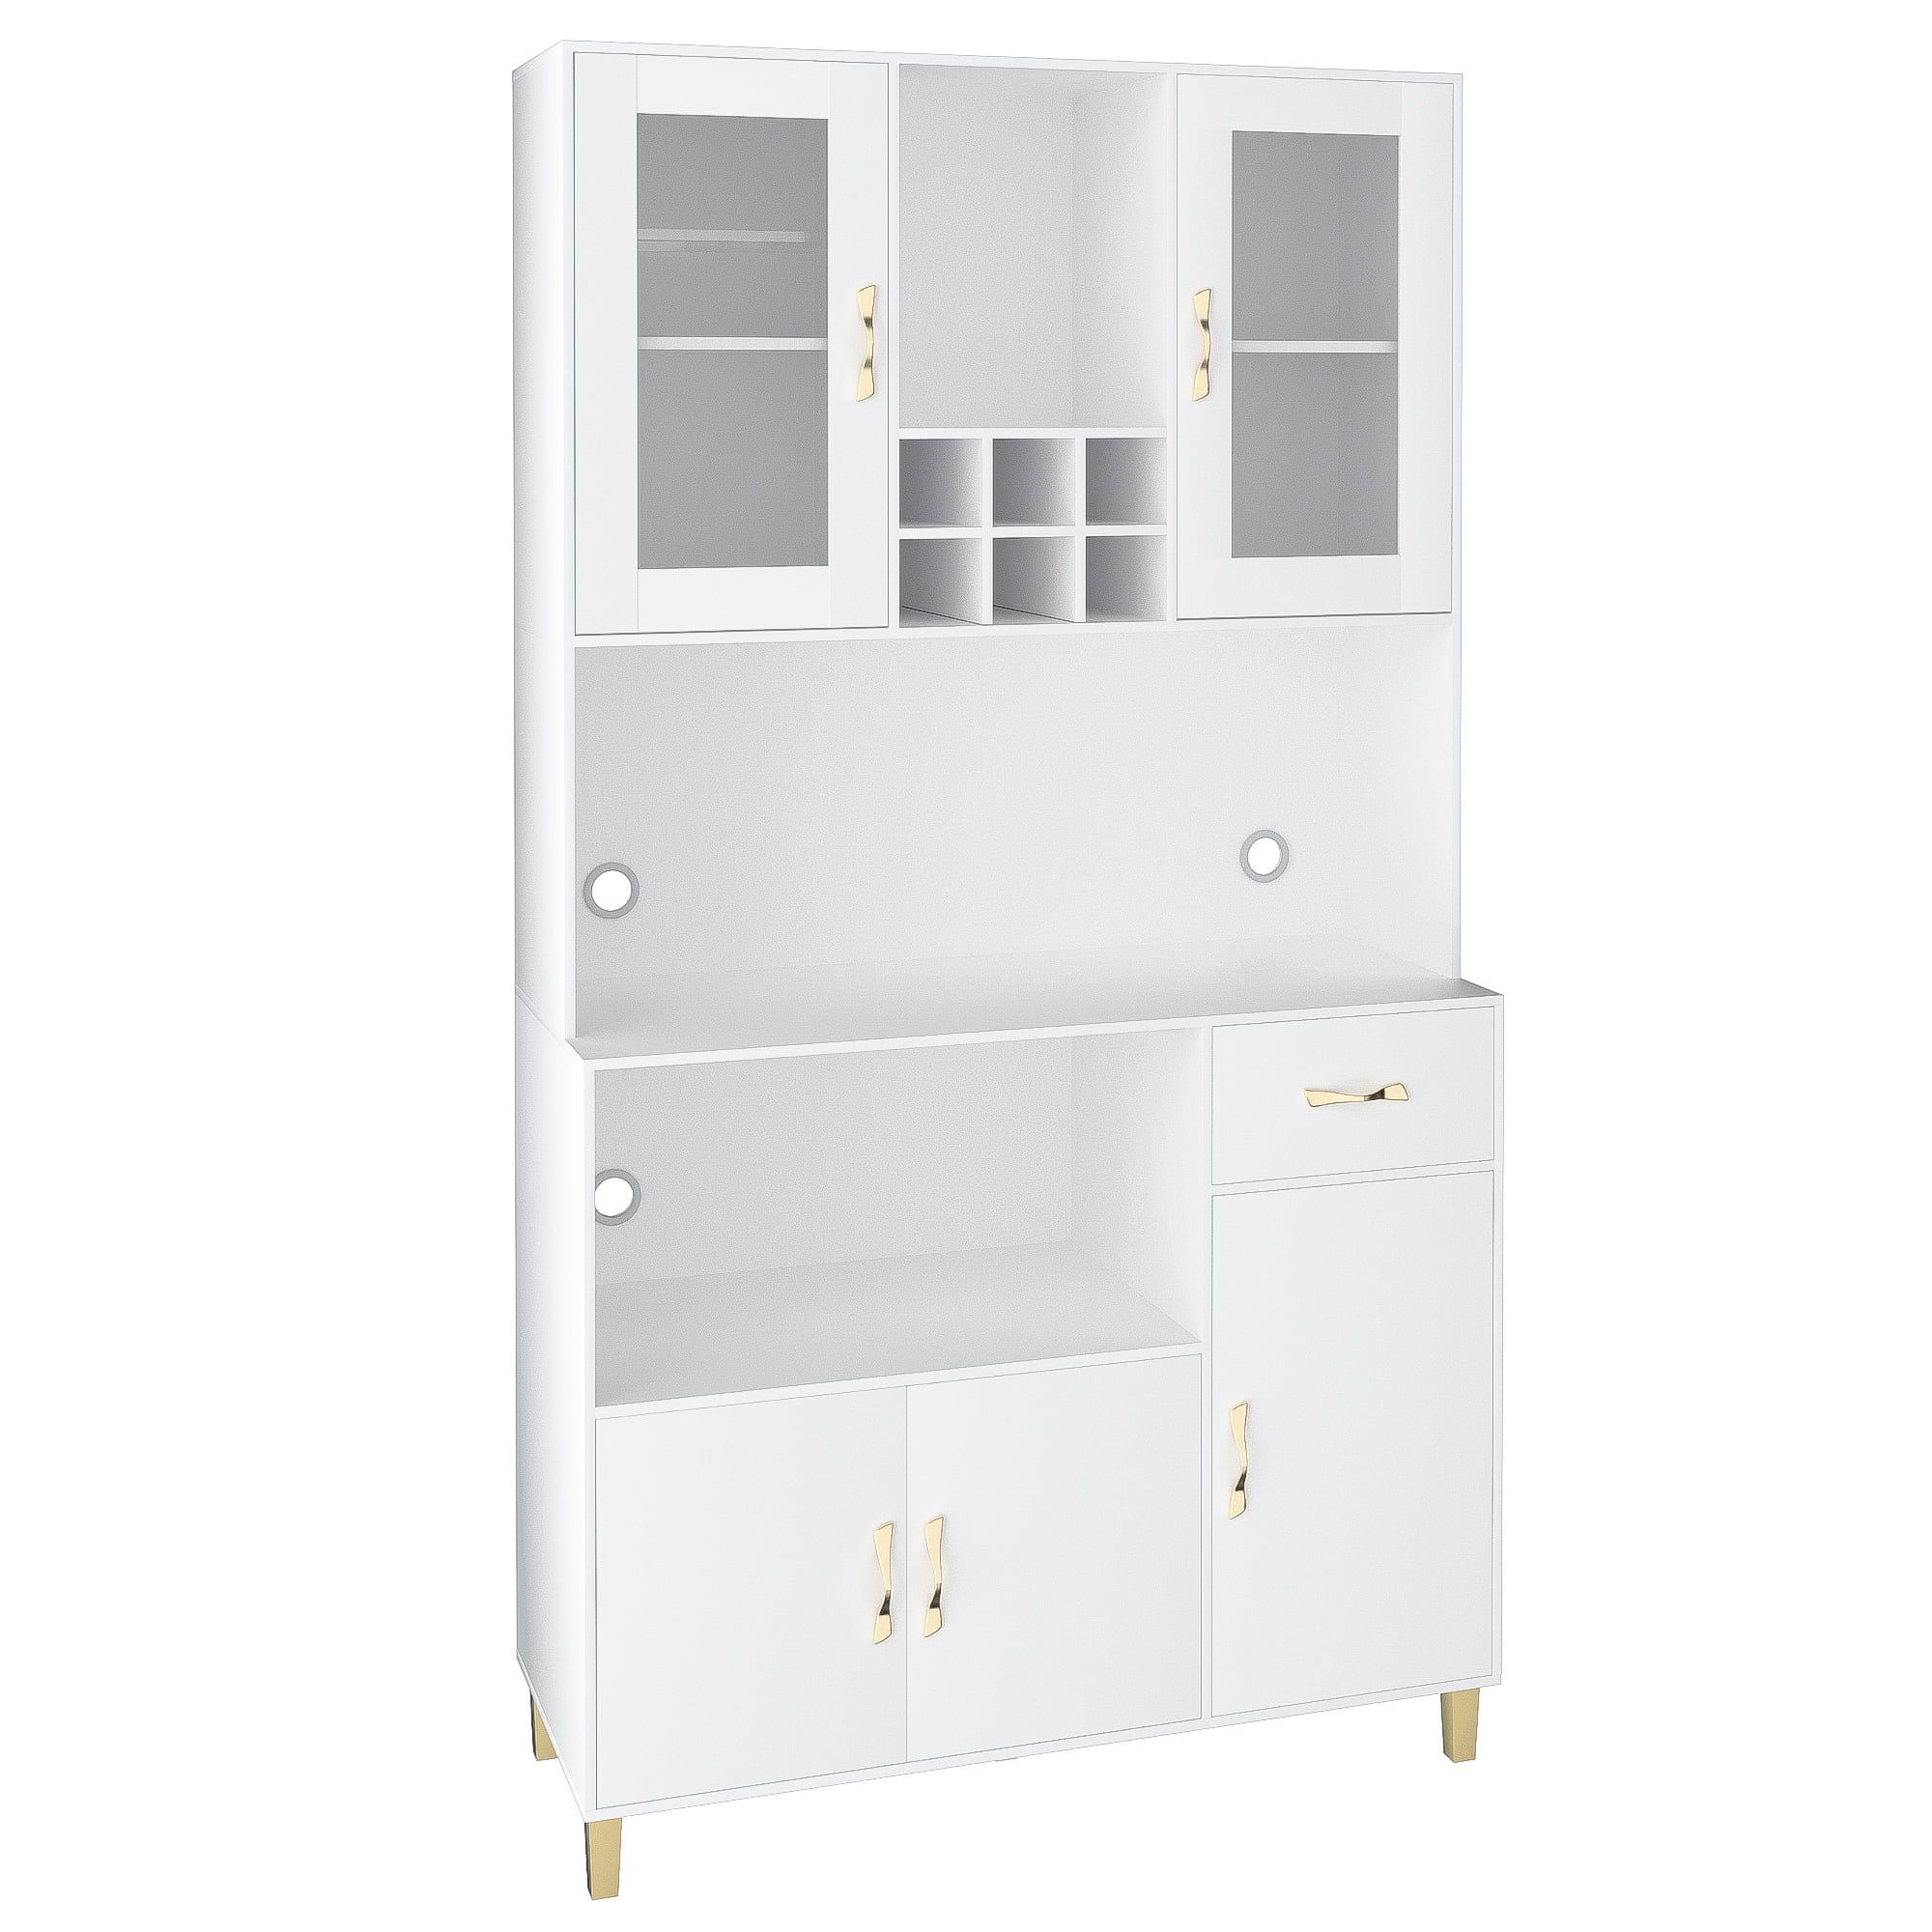 MAGINELS Plastic Storage Cabinets Pantry Cabinet with Doors and